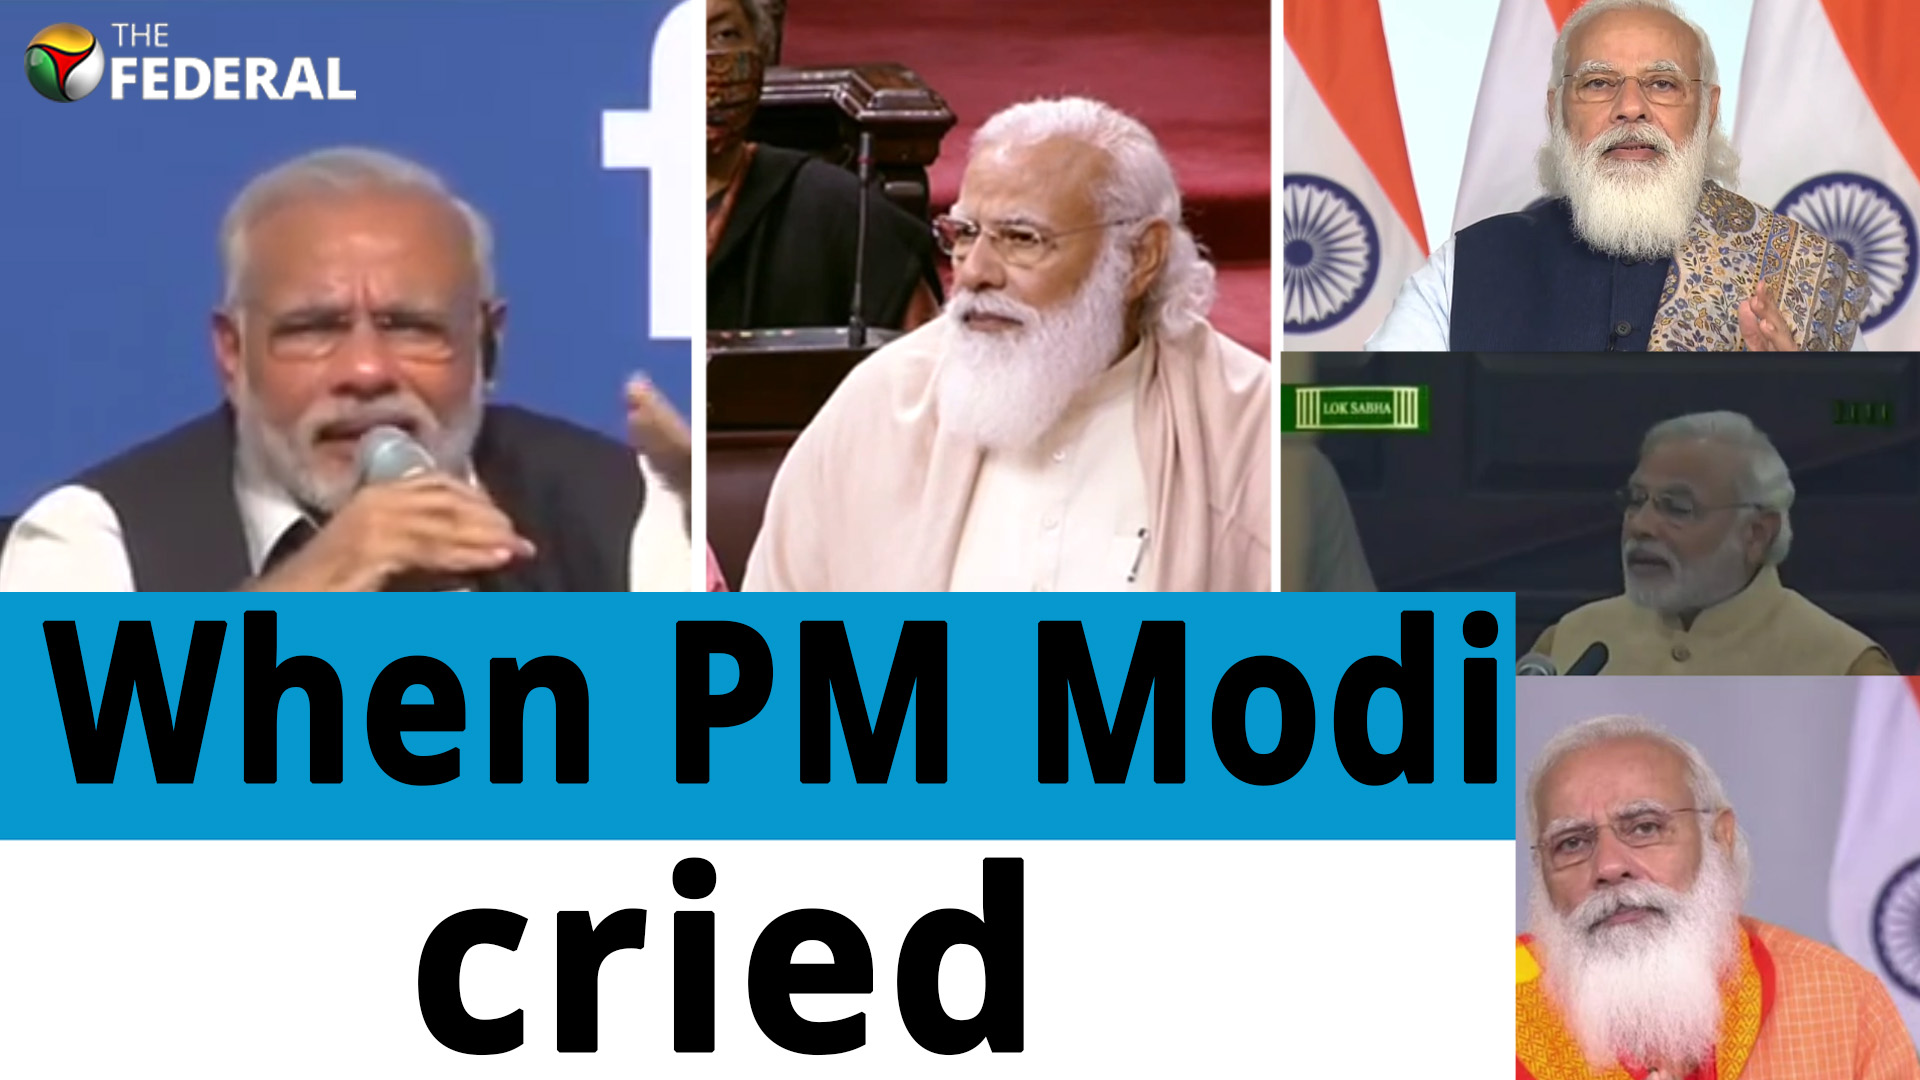 7 times when PM Modi cried on national television